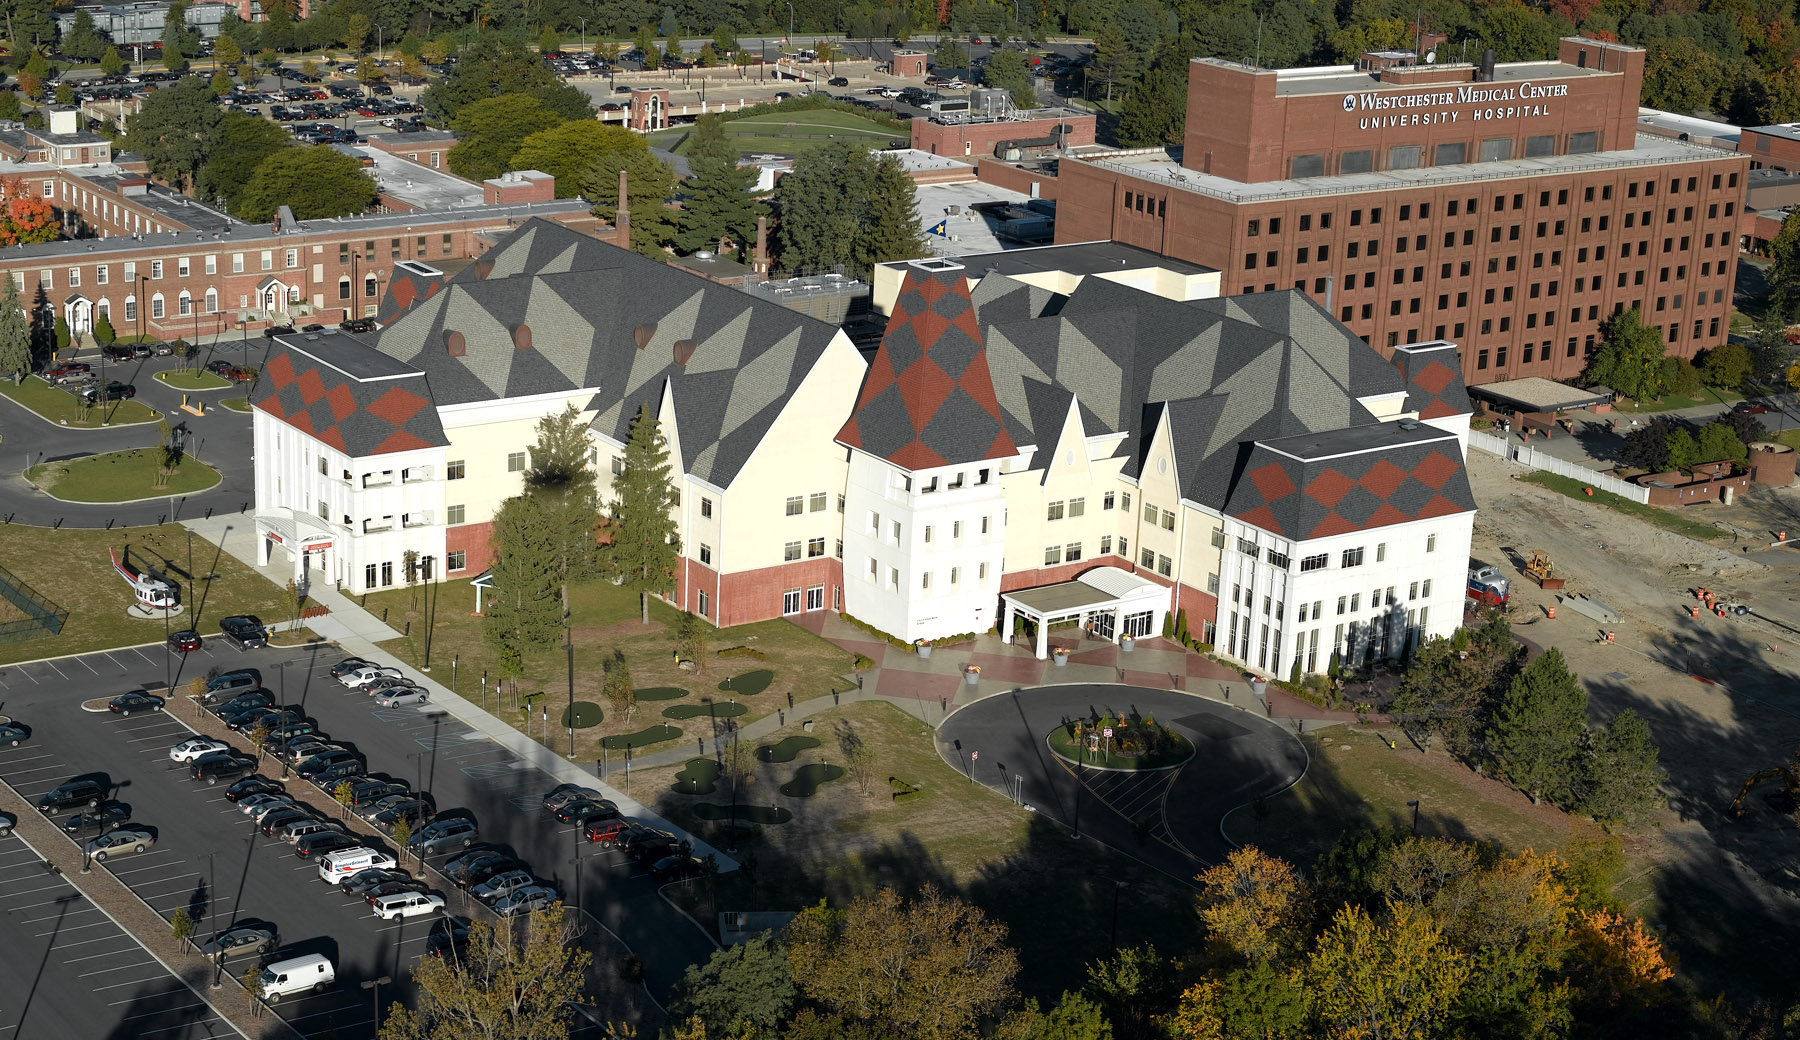 Lothrop Associates LLP has worked with the Westchester Medical Center since 1967 when it was known as Grasslands Hospital. Two of our projects shown above are the Original Red Brick Patient Tower and the Maria Ferrari Children’s Hospital in the foreground showing how the approach toward healthcare has changed over the years. 